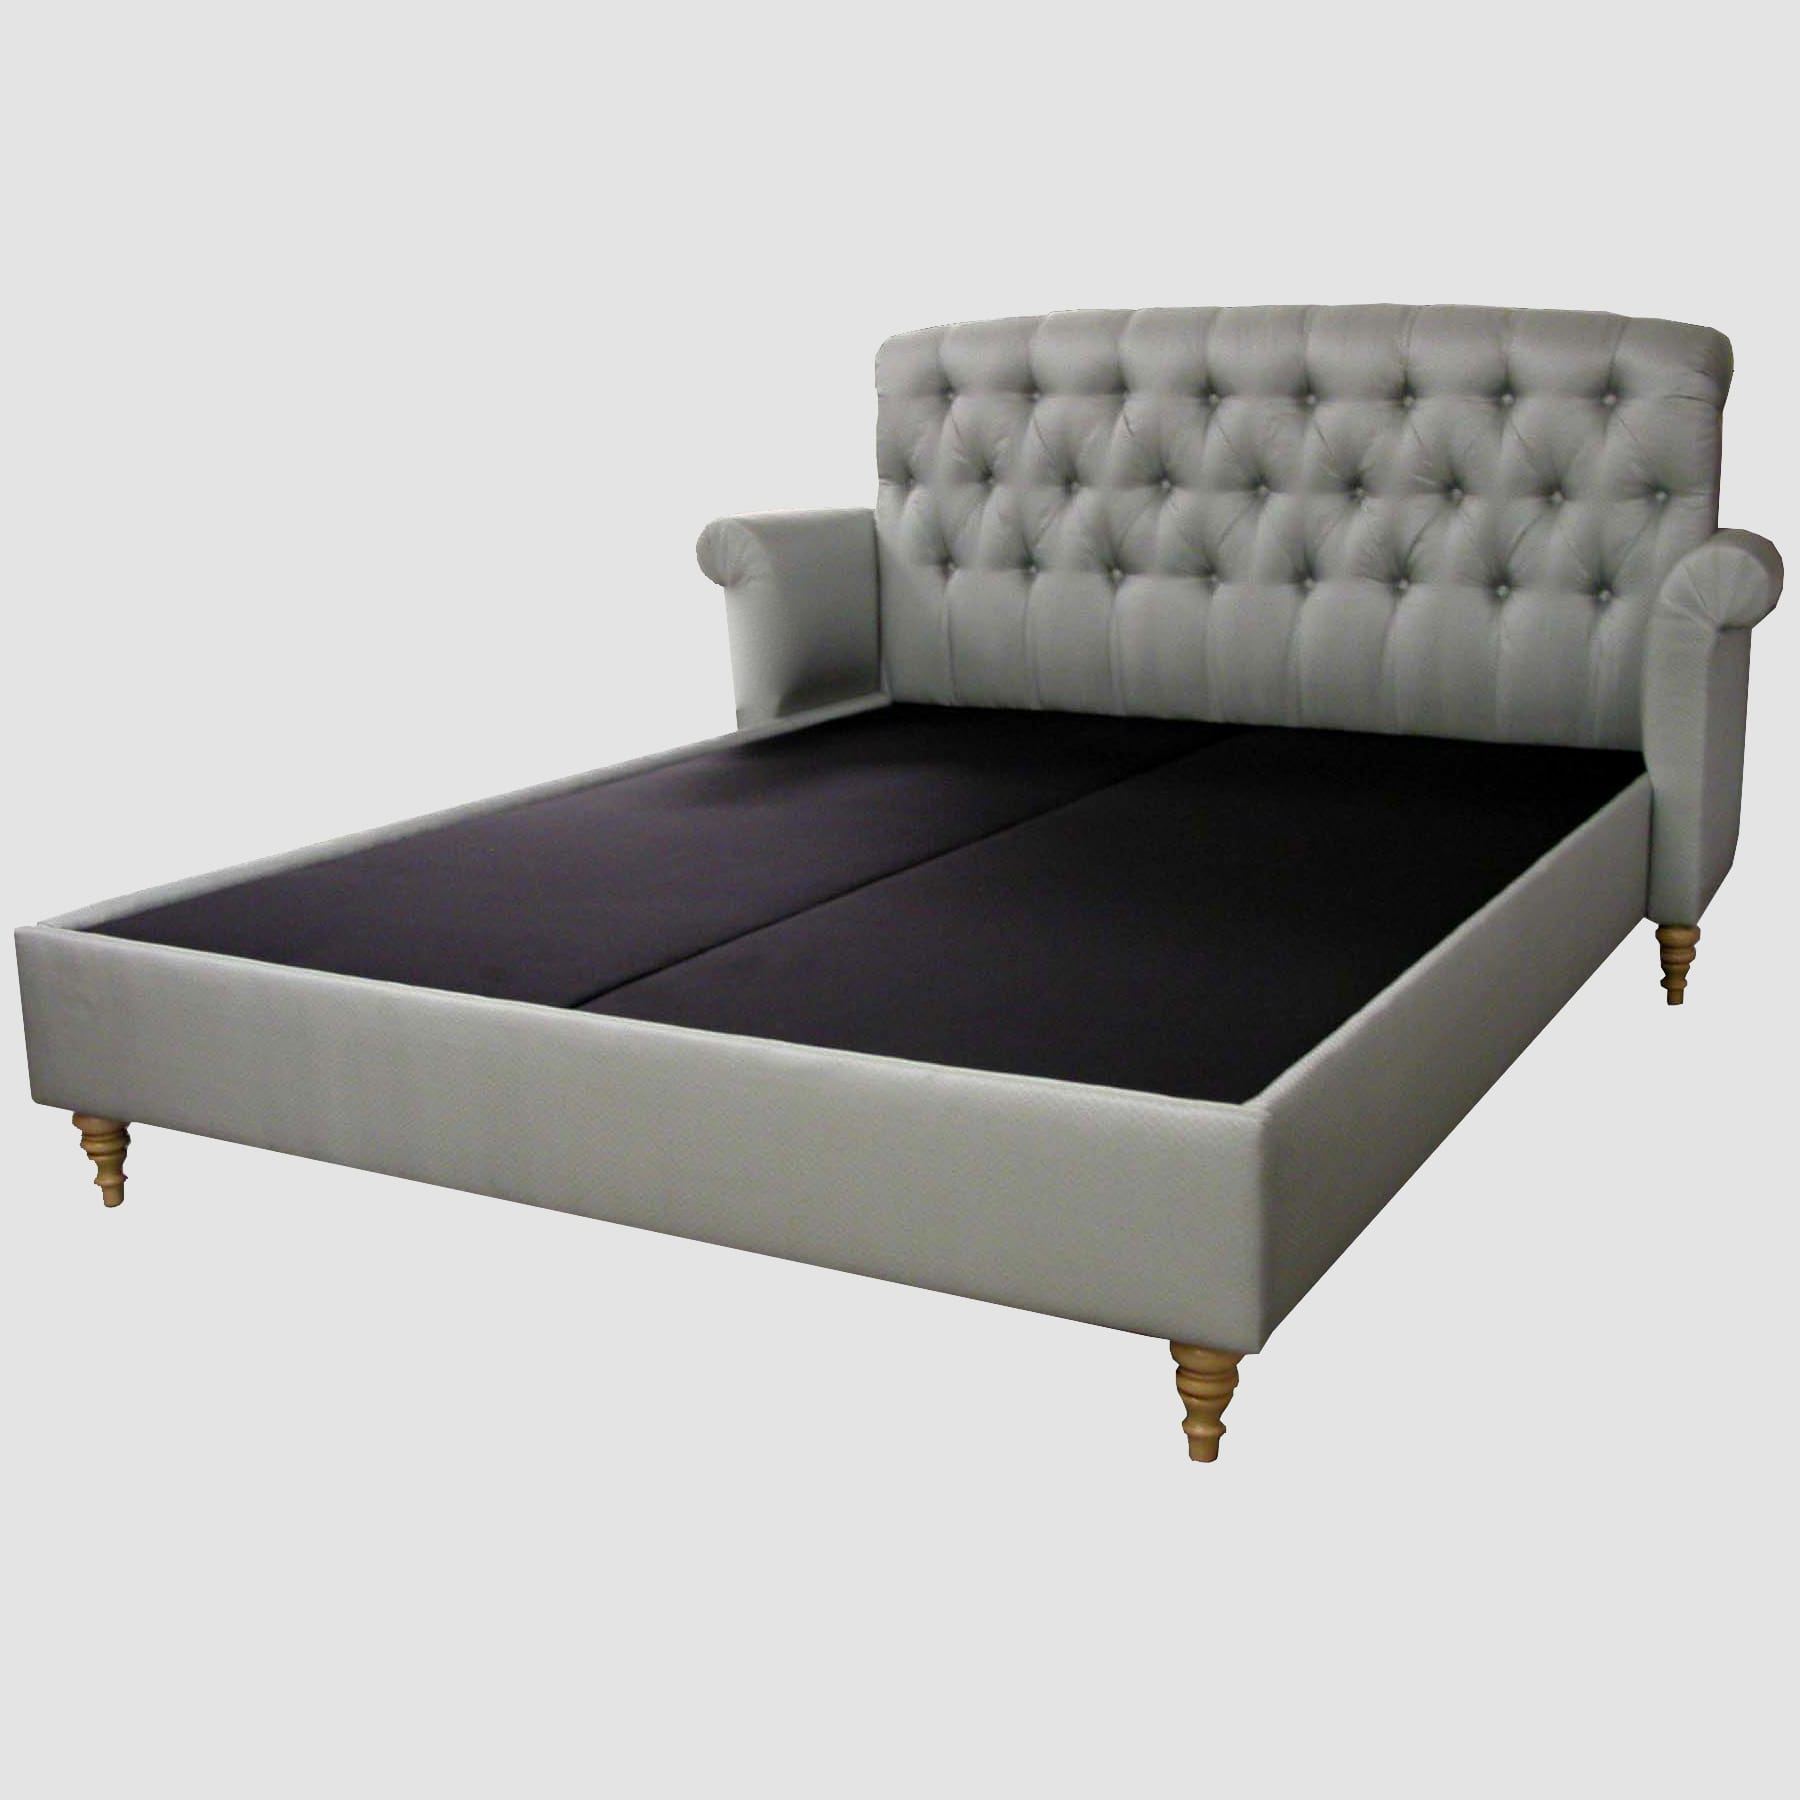 The Angie Upholstered Headboard by Jamie Stern Furniture